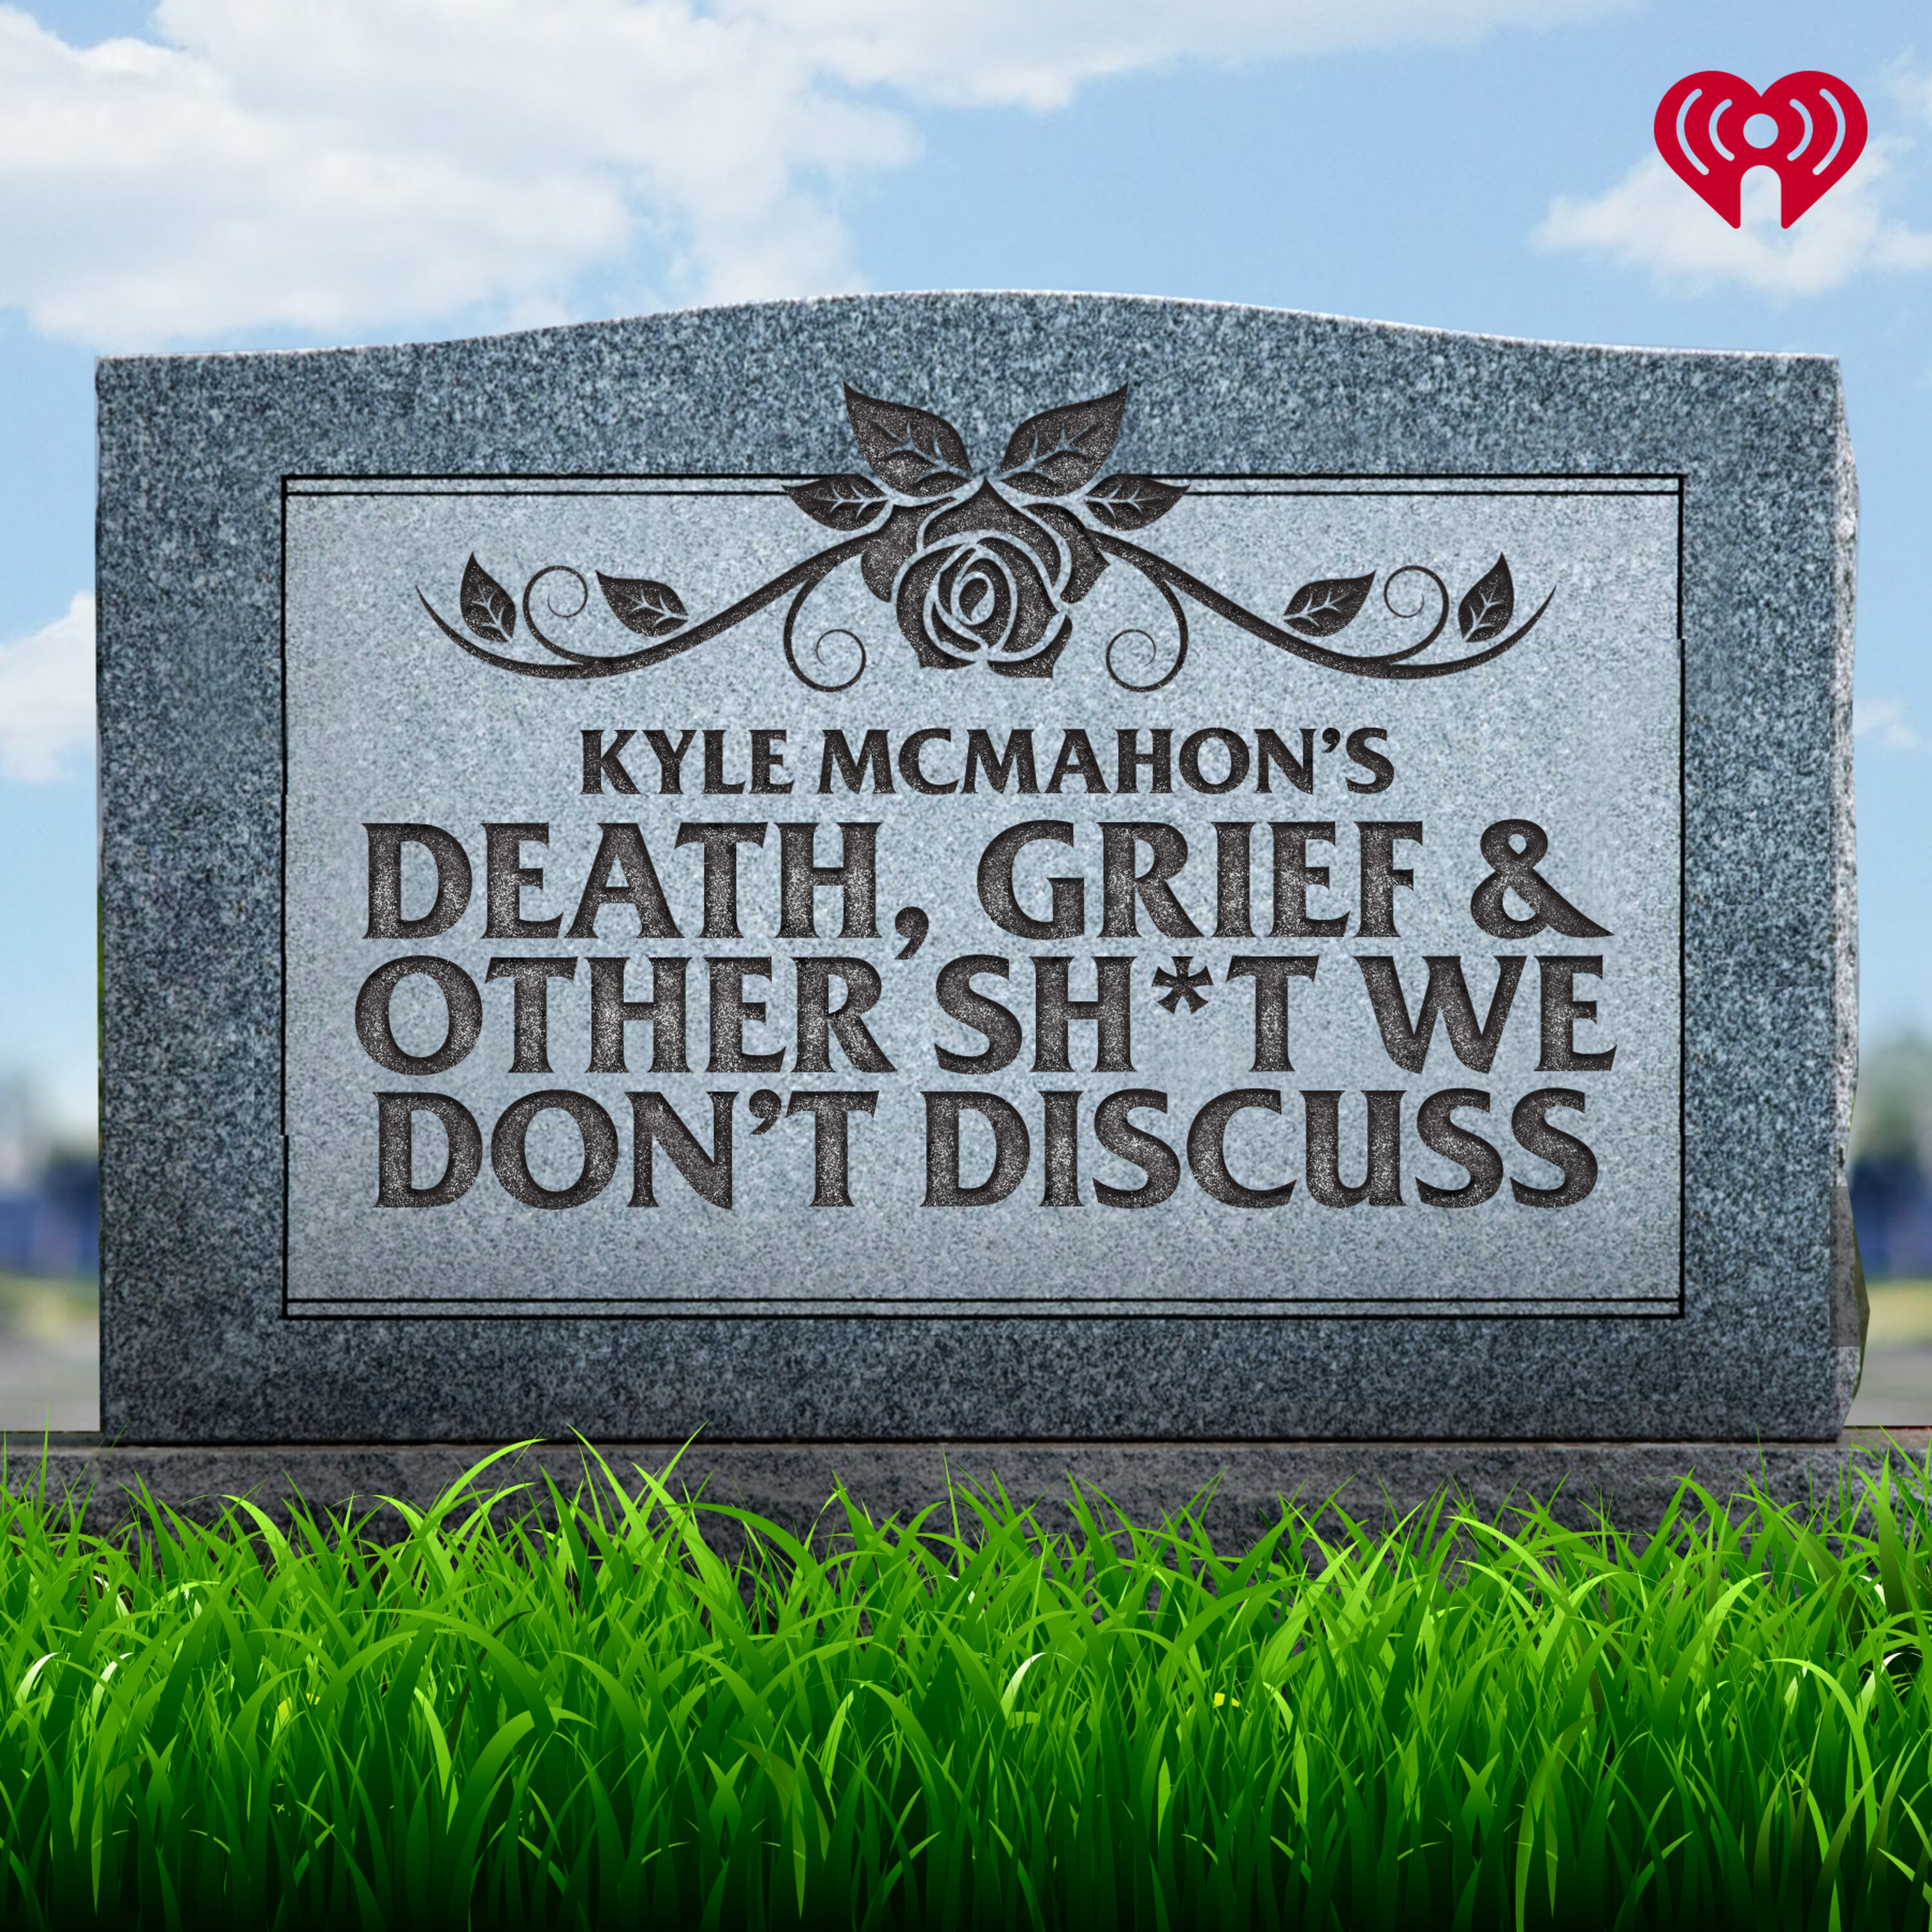 Introducing Death, Grief, & Other Sh*t We Don't Discuss